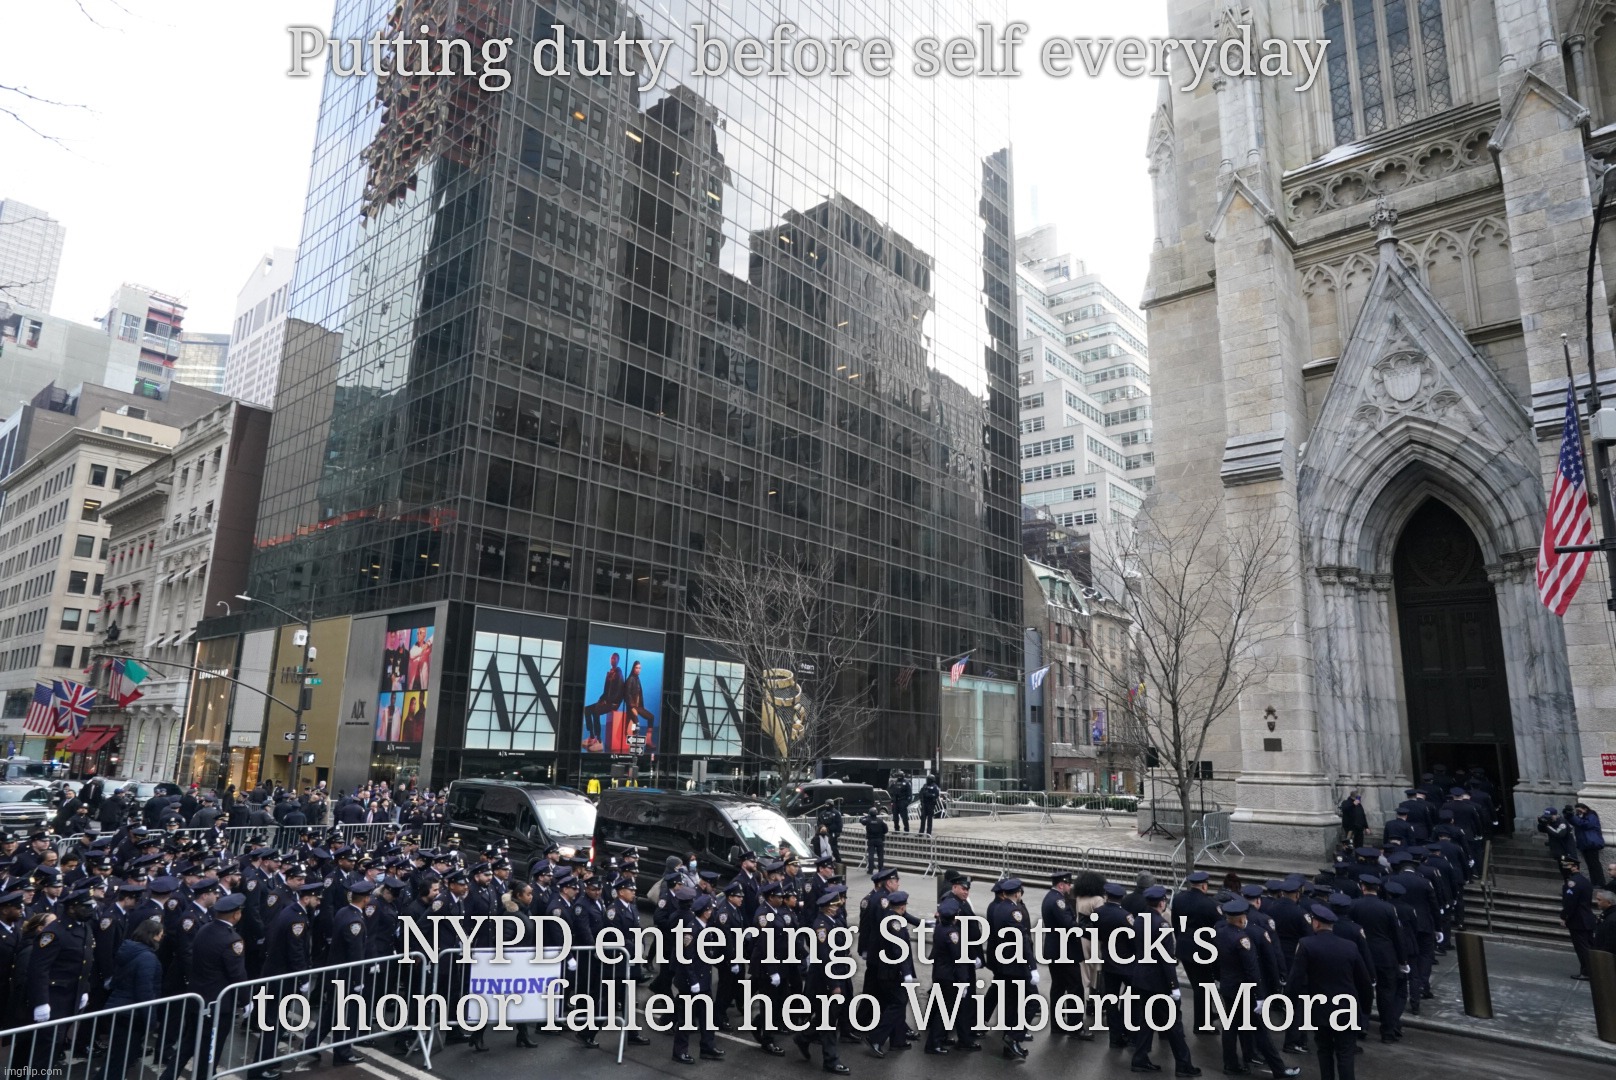 NYPD funeral procession for police officer Wilbert Mora | Putting duty before self everyday; NYPD entering St Patrick's to honor fallen hero Wilberto Mora | image tagged in nypd funeral procession for police officer wilbert mora,wilbert mora,nypd,rip,a hero sacrficed himself for us,memes | made w/ Imgflip meme maker